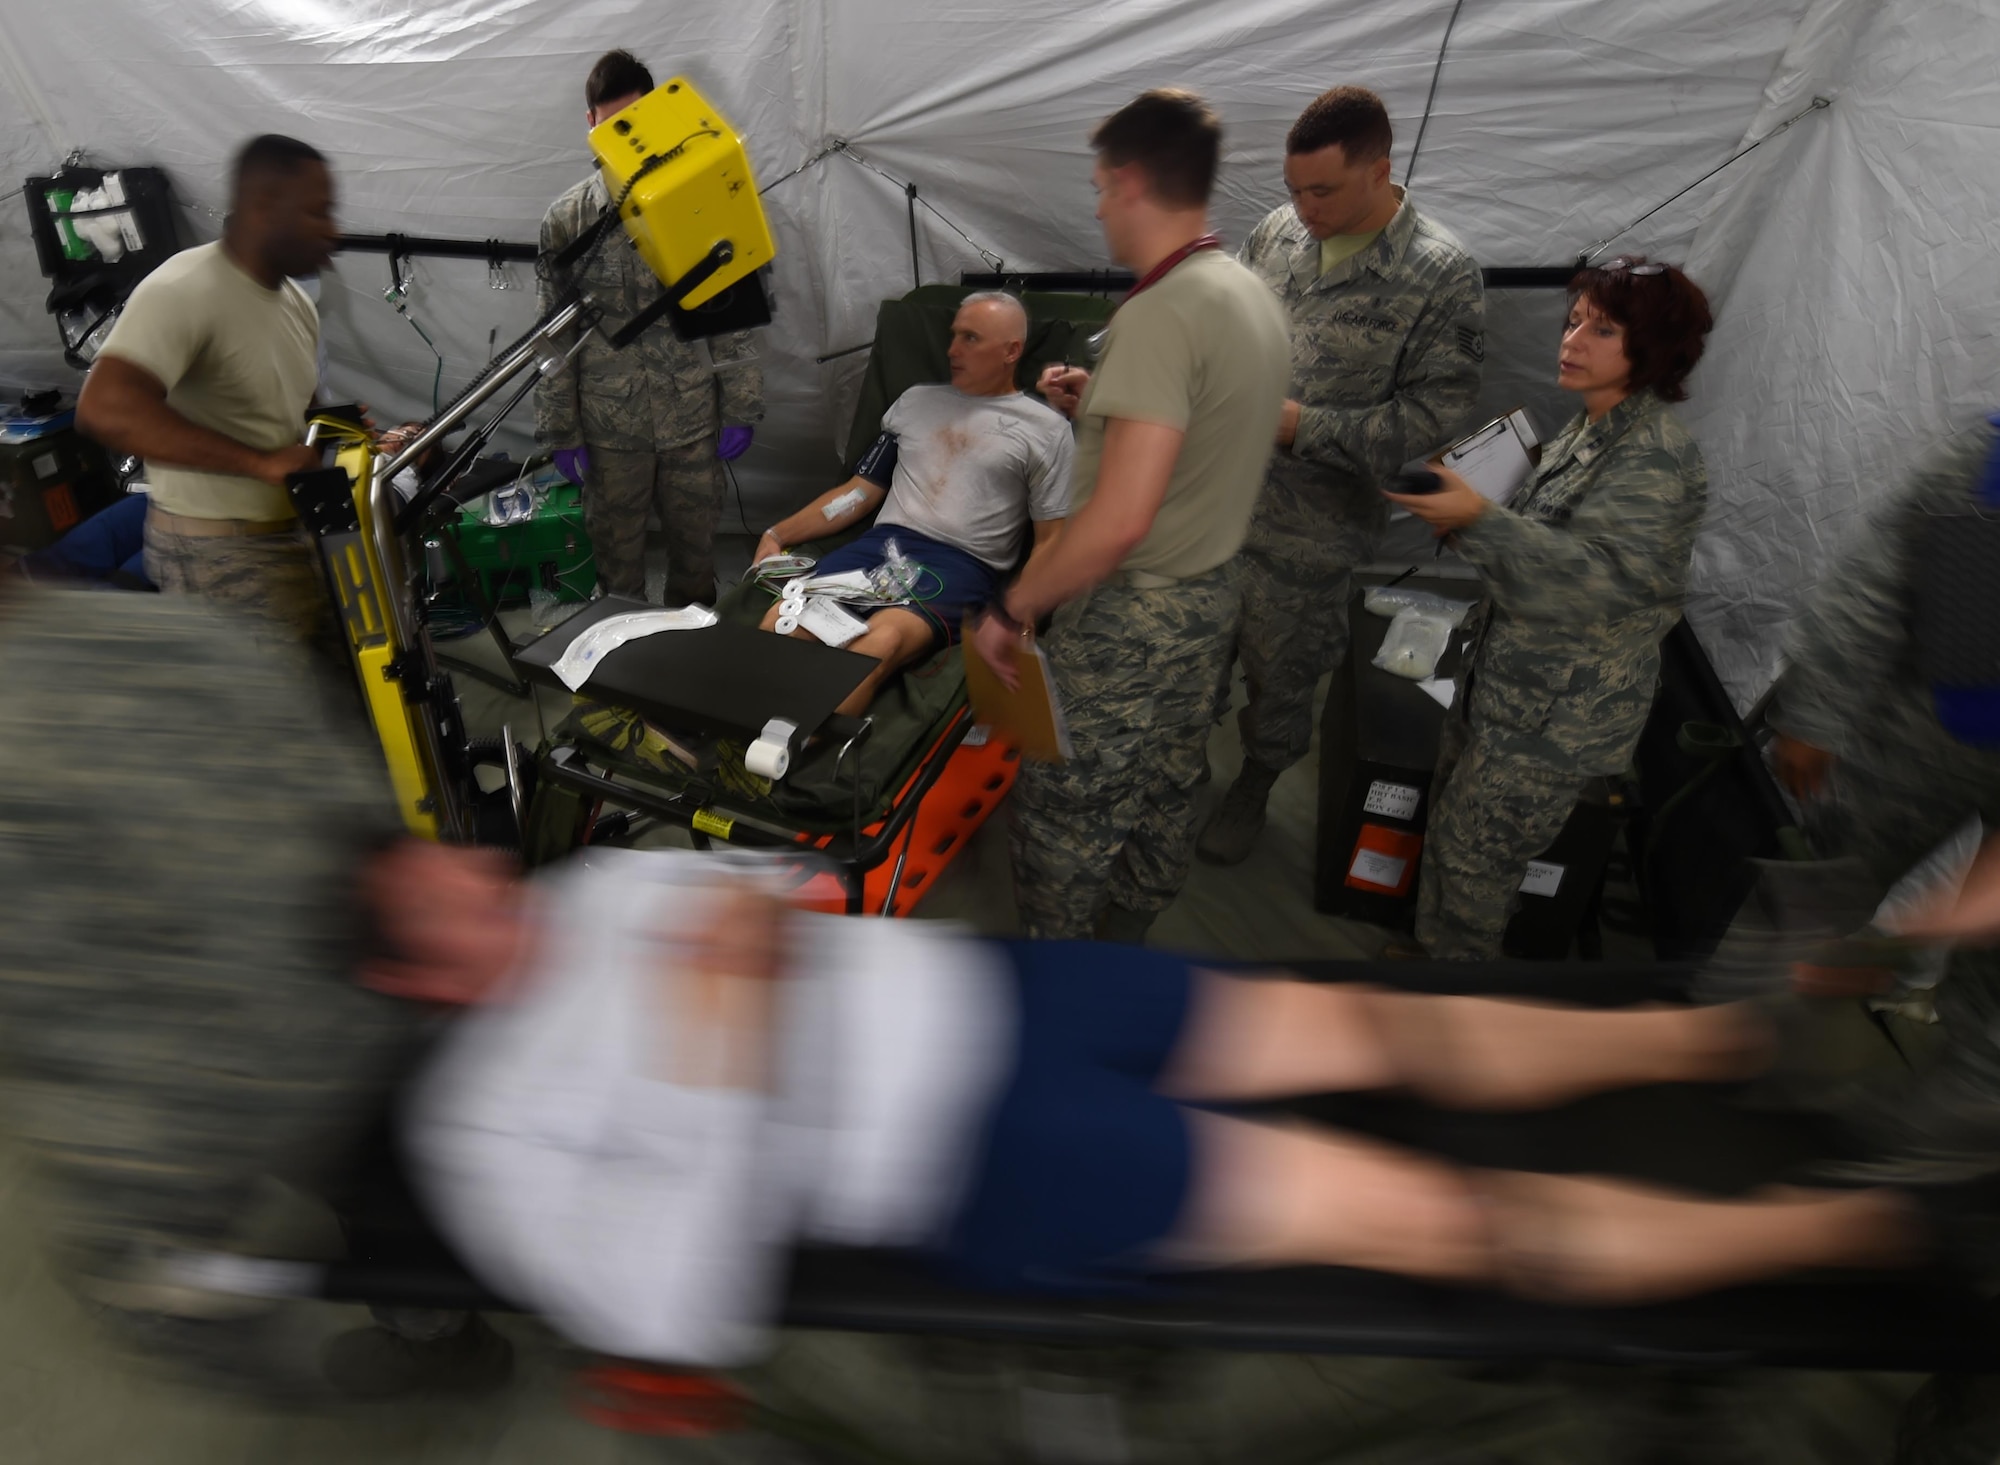 U.S. Air Force Emergency room doctors and technicians treat patients with simulated injuries and illnesses during a medical global response force training exercise at Joint Base Langley-Eustis, Va., Oct. 20, 2016. Members of the medical group put the 25-bed field hospital to the test while treating real-world and simulated patients. (U.S. Air Force photo by Staff Sgt. Natasha Stannard)